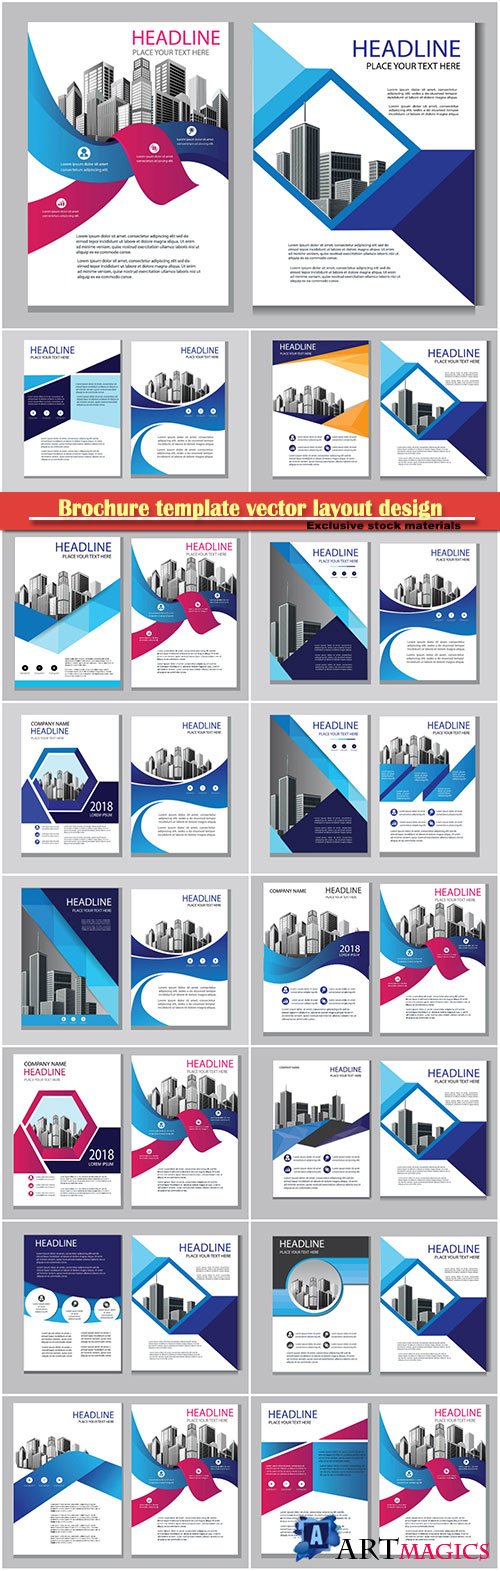 Brochure template vector layout design, corporate business annual report, magazine, flyer mockup # 129